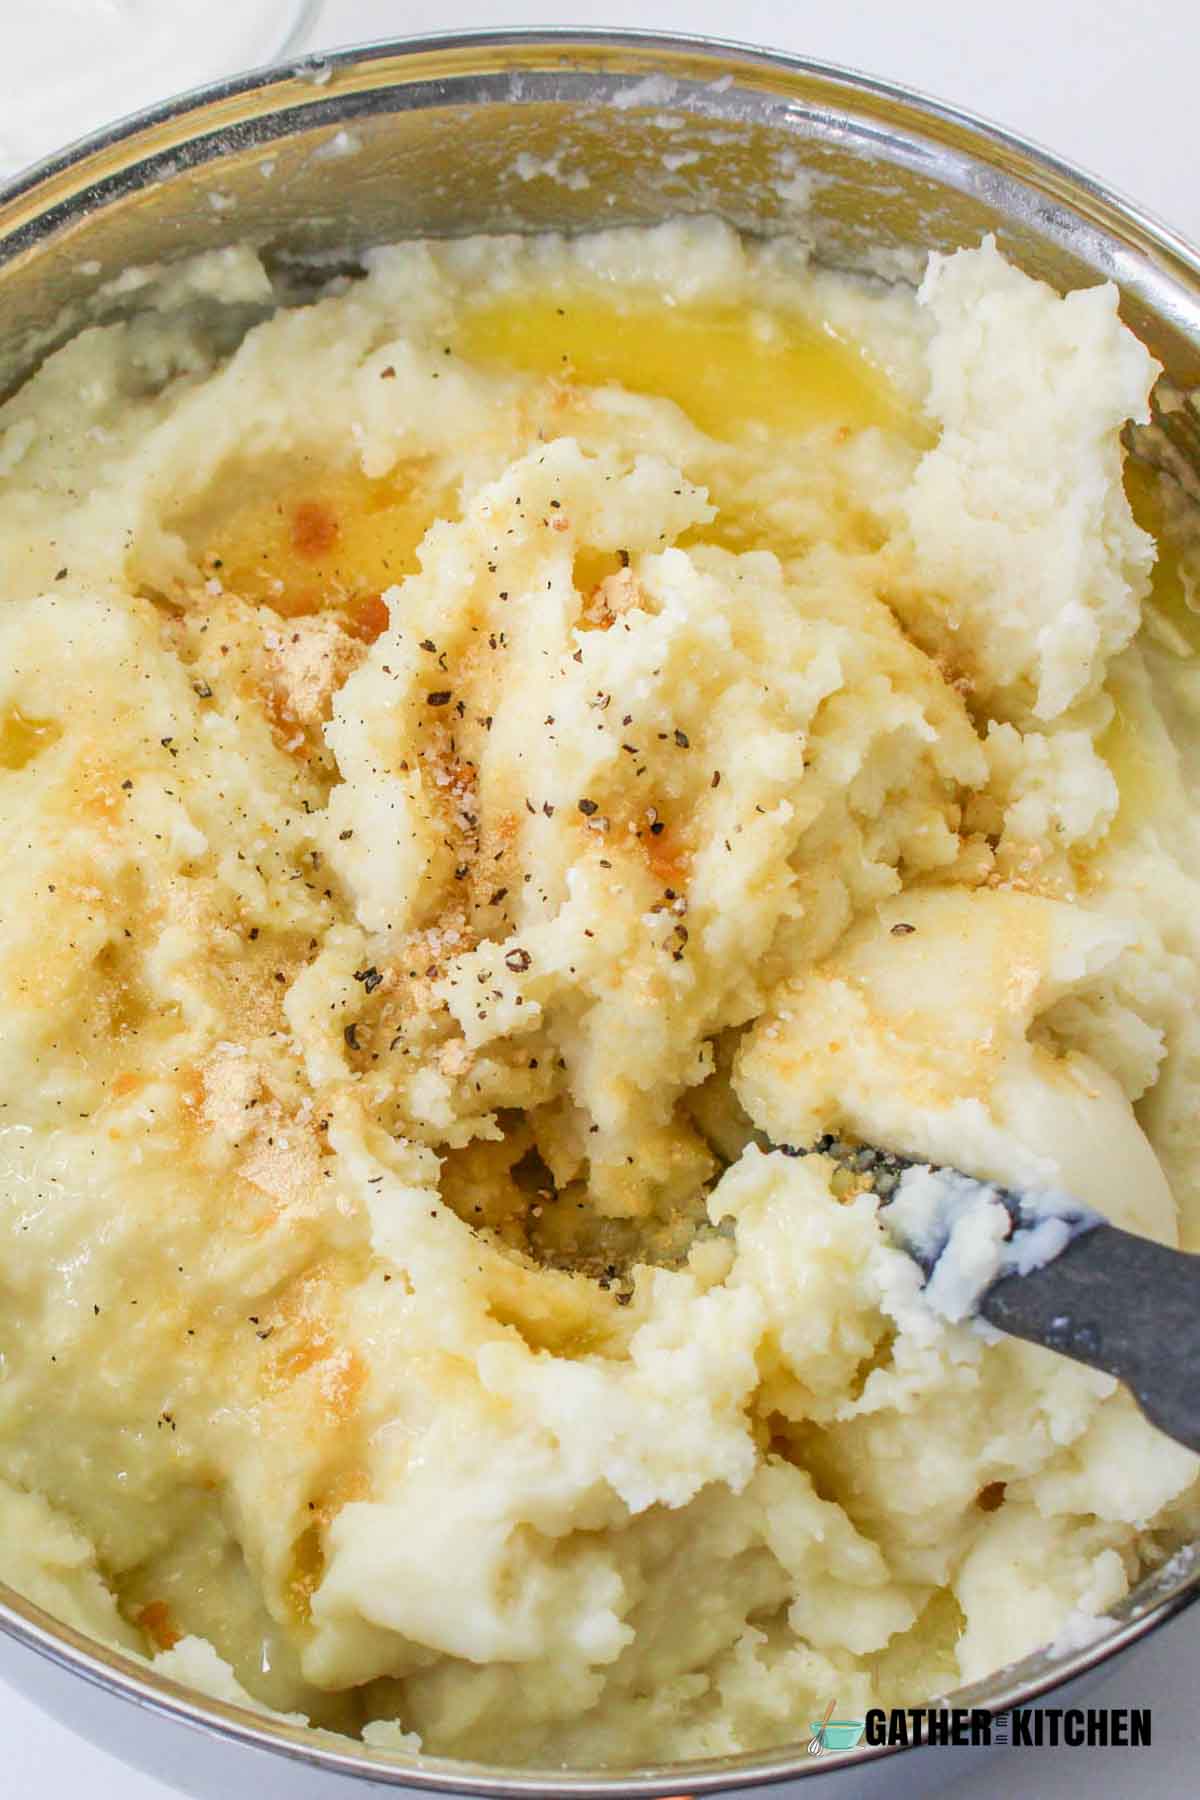 Mashed potatoes with melted butter, salt and pepper.